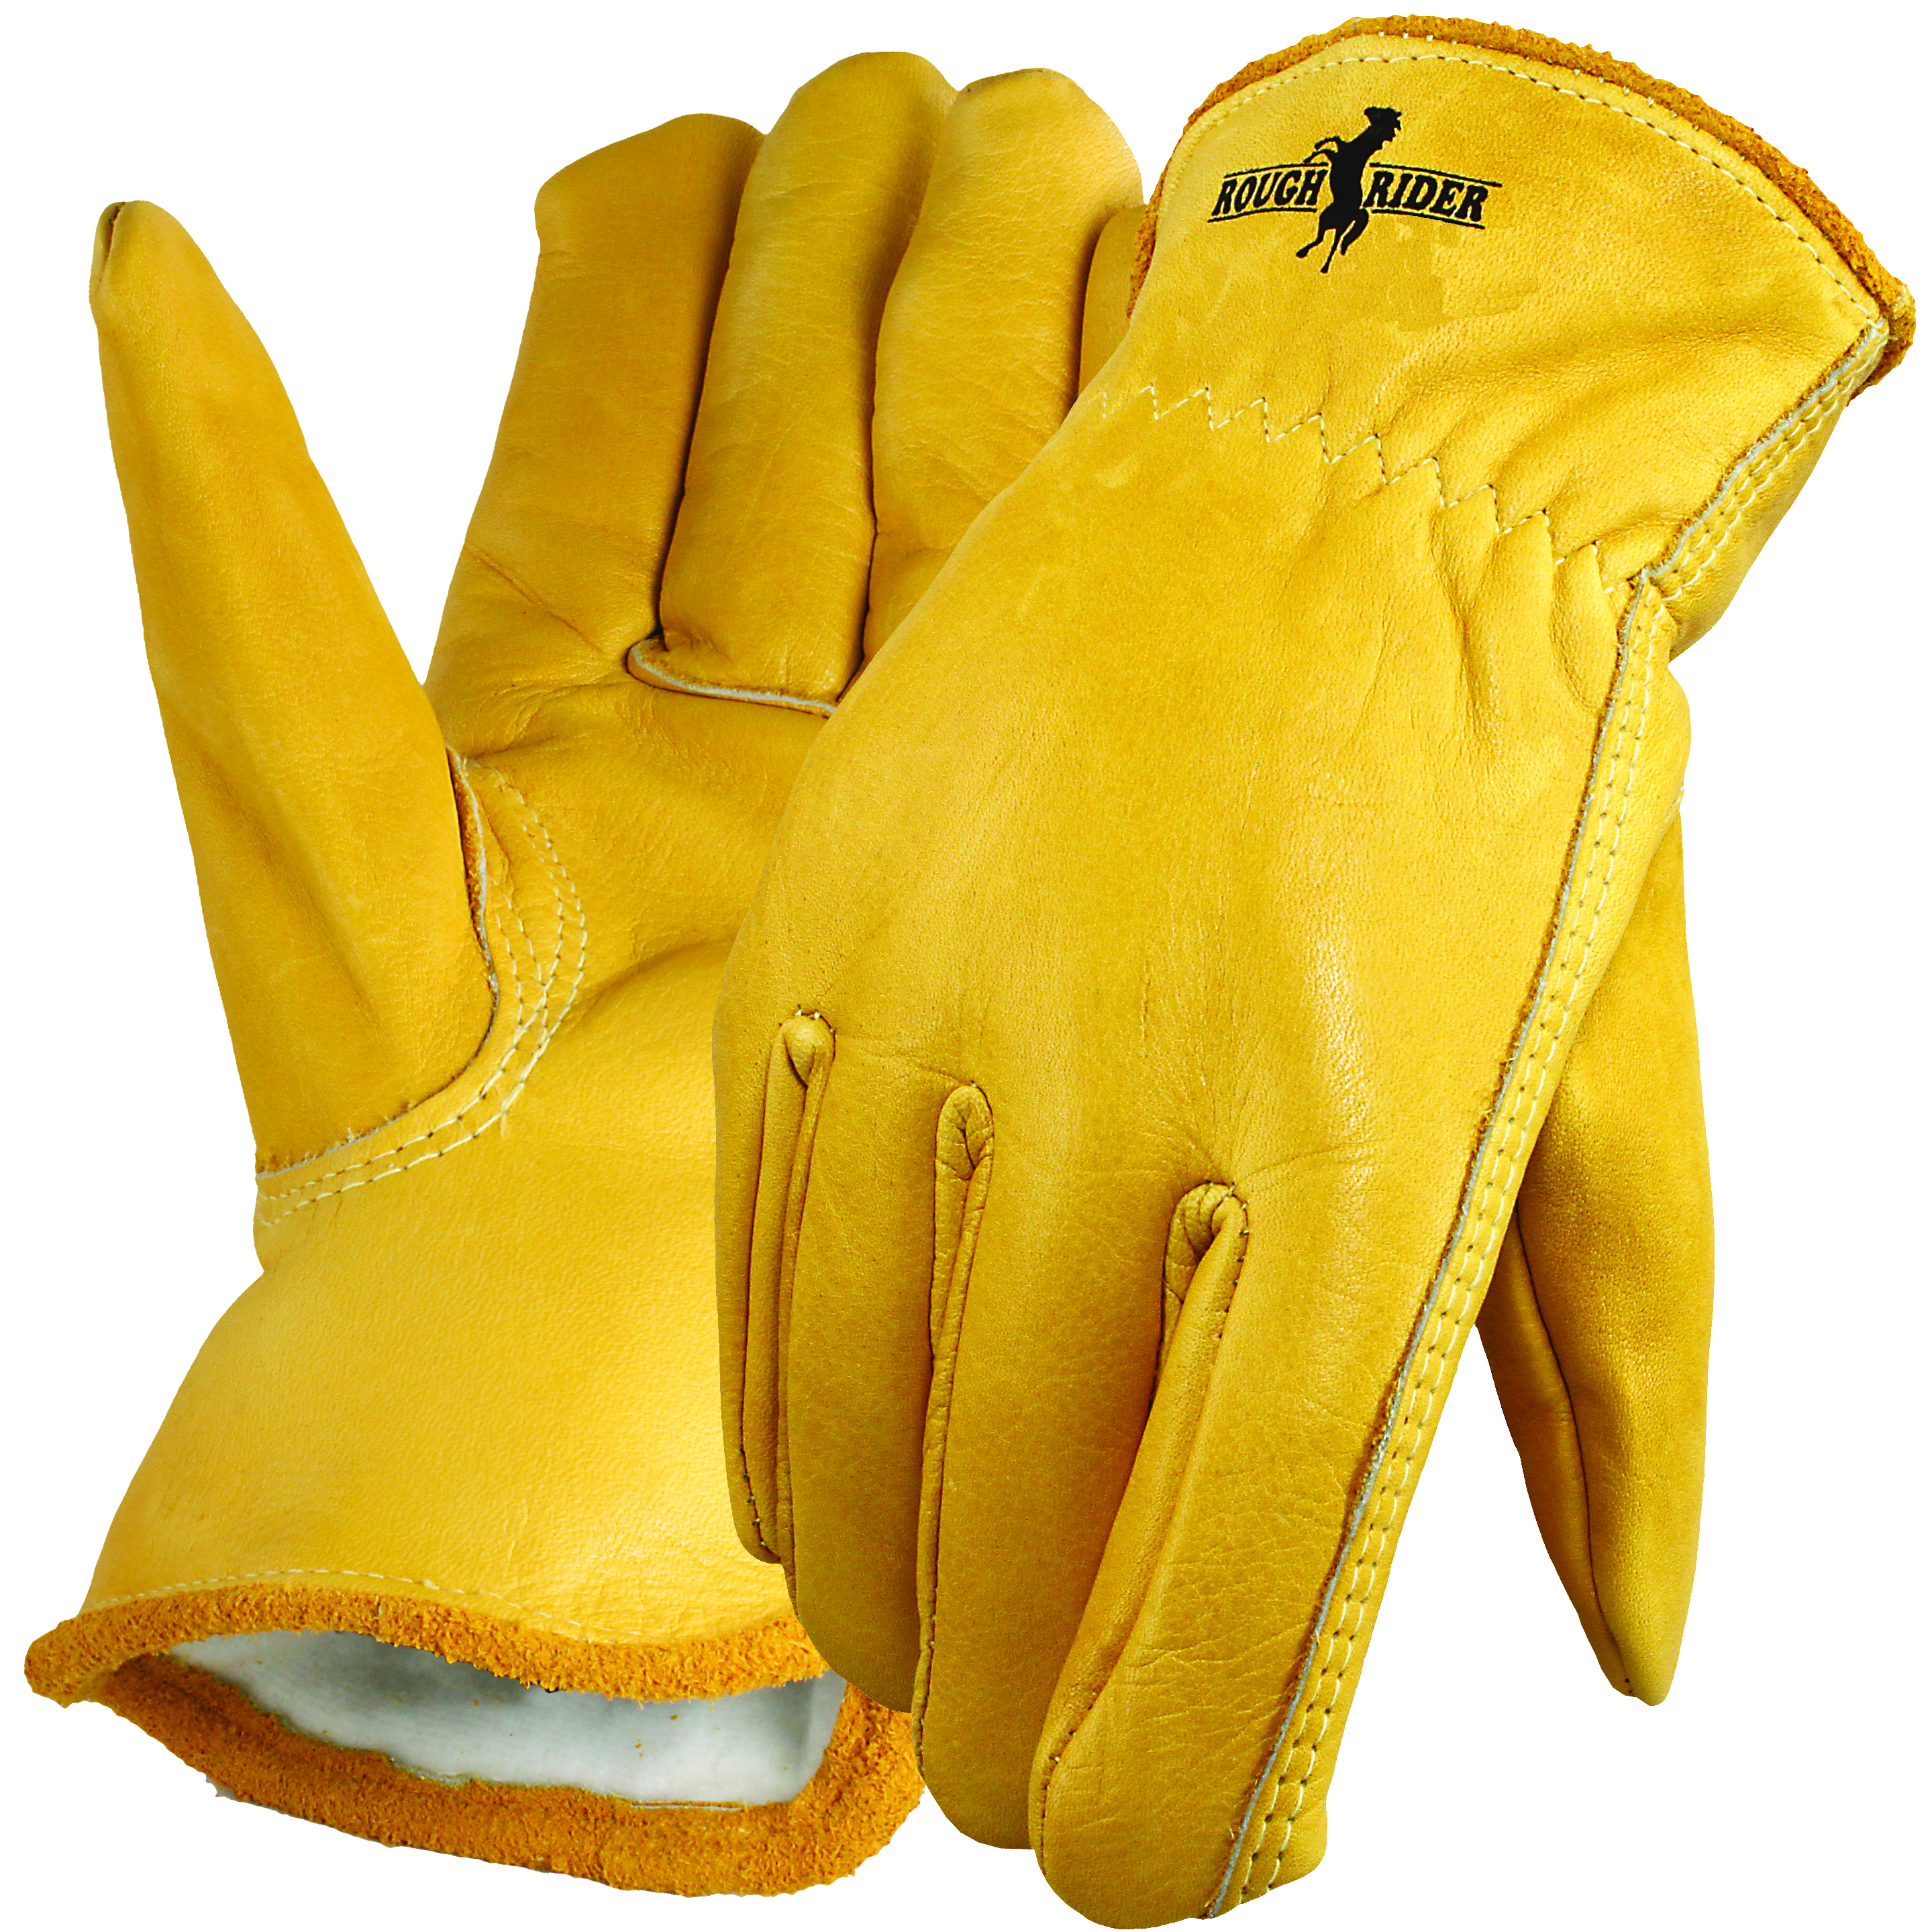 Rough Rider&reg; Gloves, Thermal Insulation, Sewn with Cut Resistant Thread